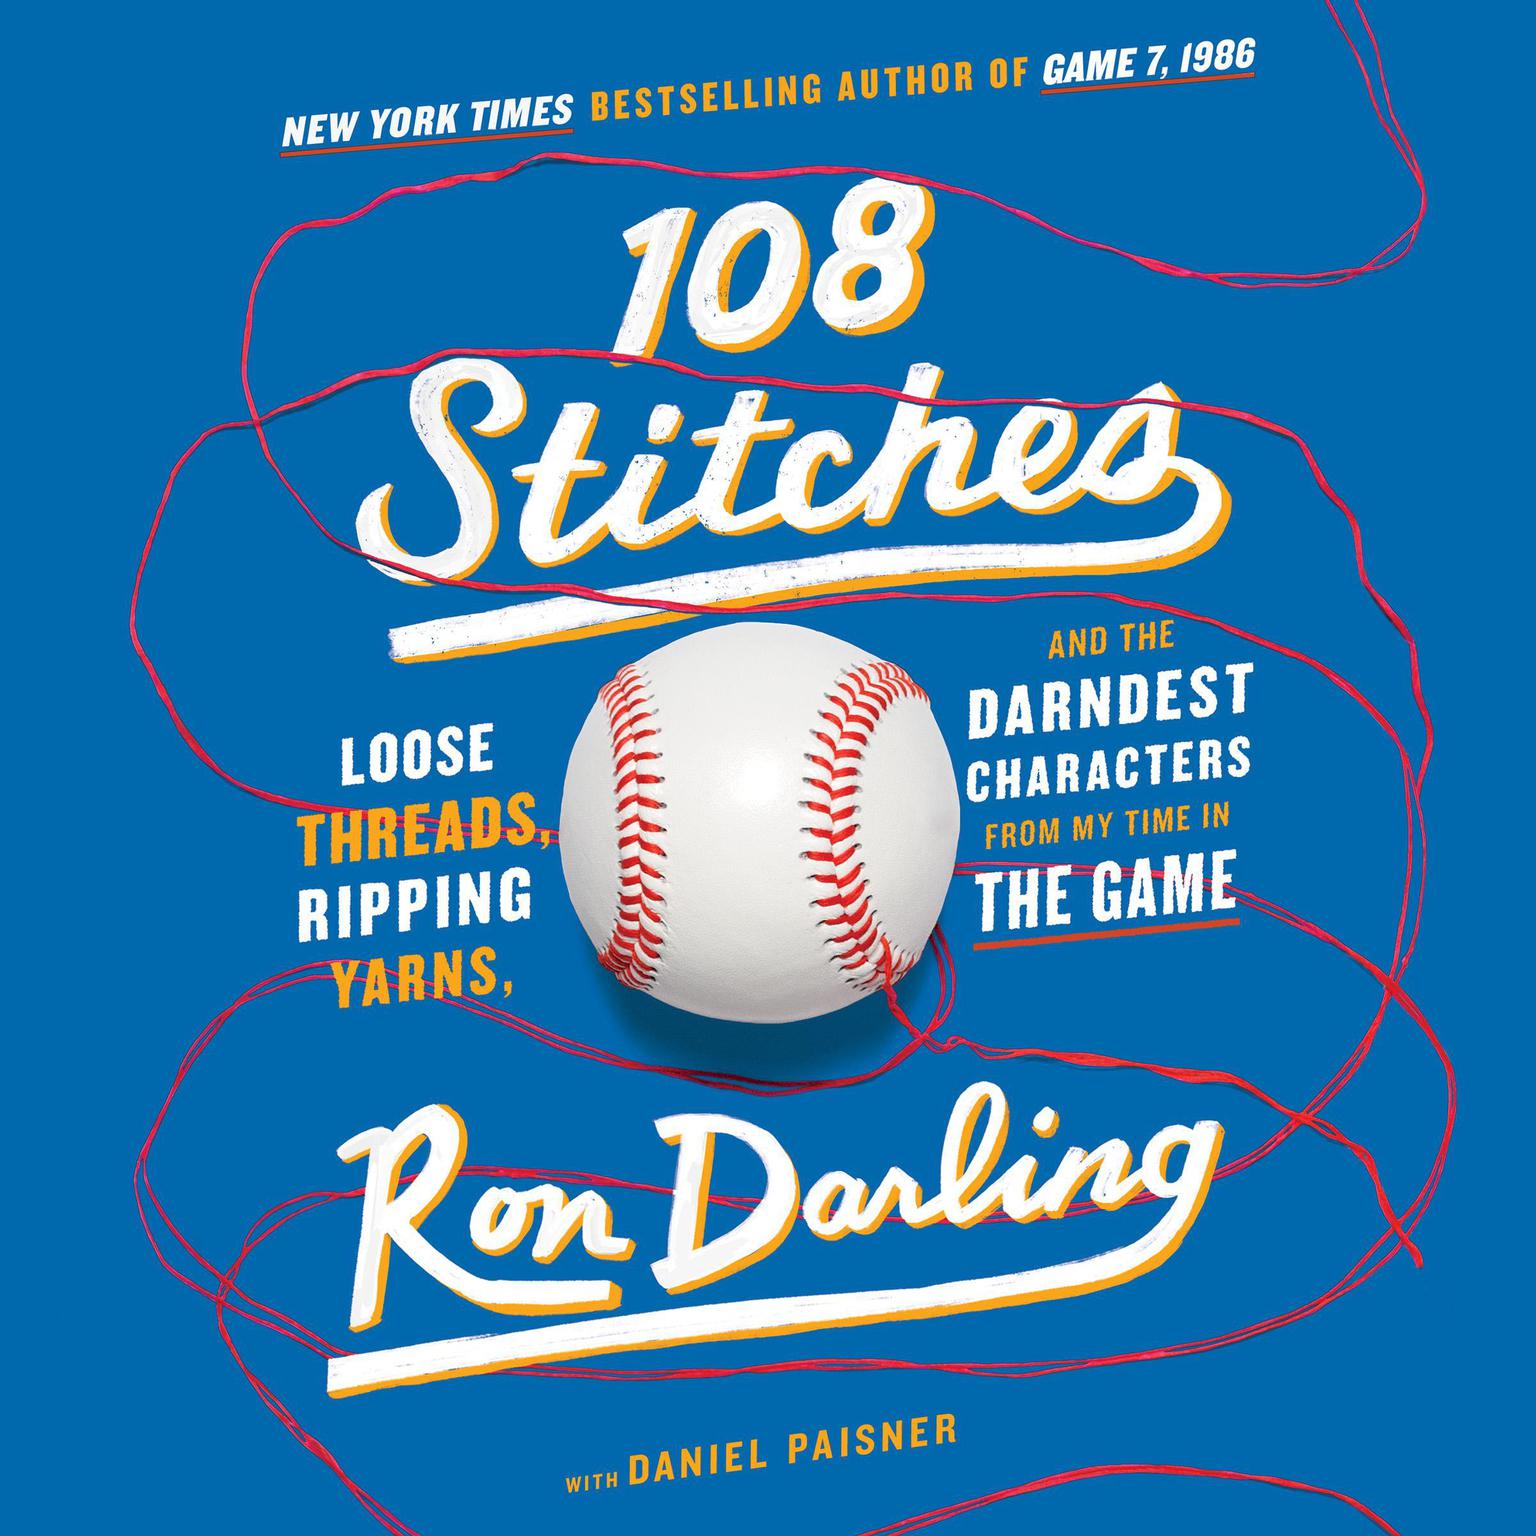 108 Stitches: Loose Threads, Ripping Yarns, and the Darndest Characters from My Time in the Game Audiobook, by Ron Darling